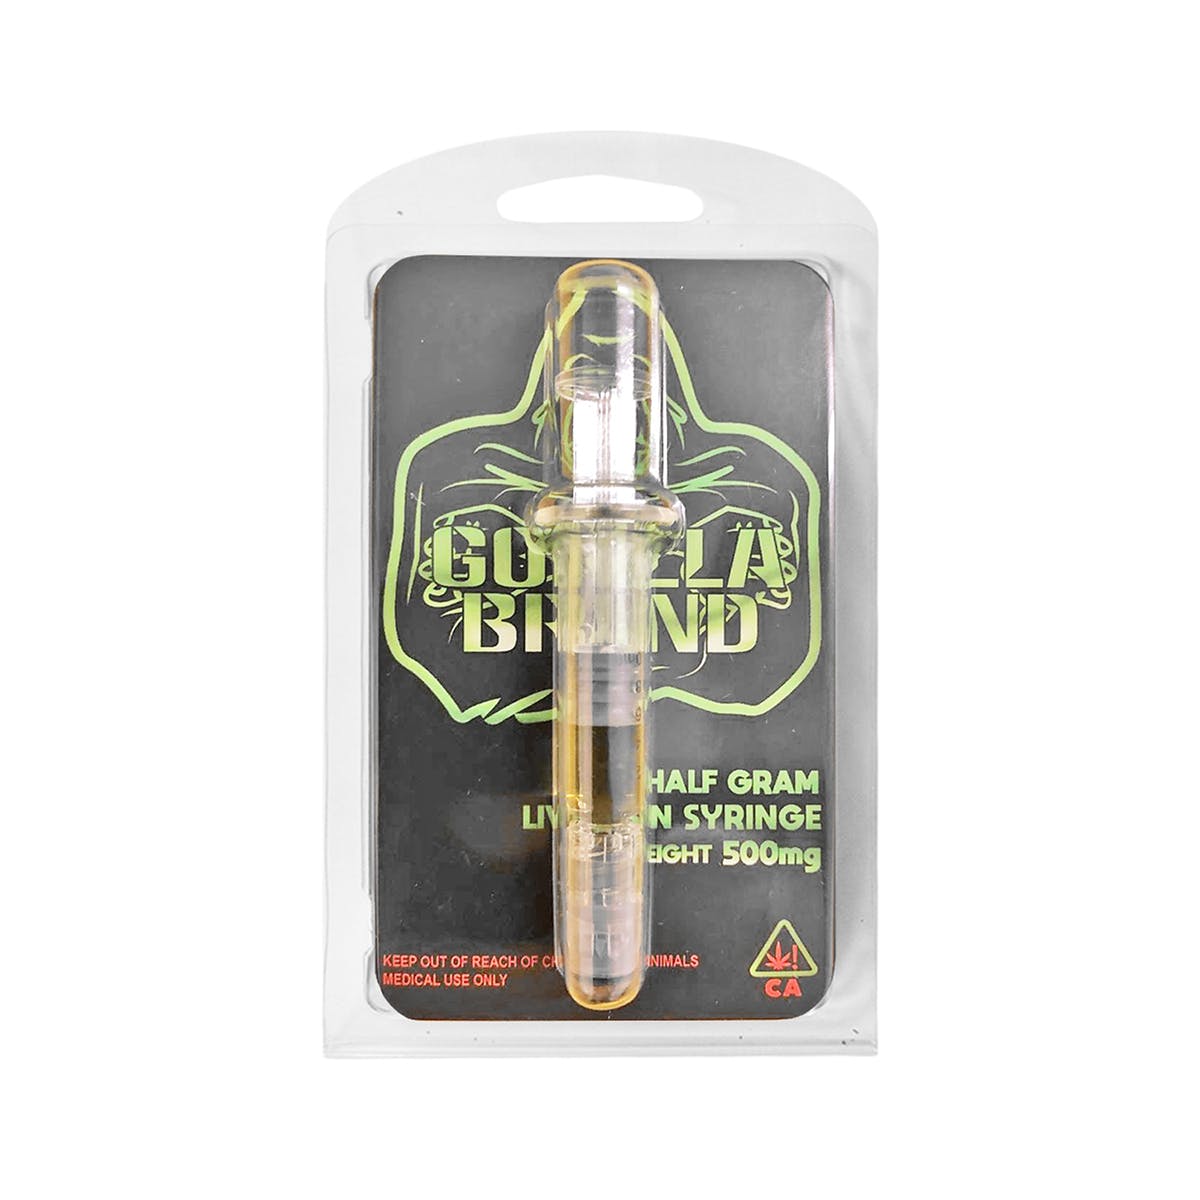 marijuana-dispensaries-ogs-a-ozs-5g-for-2435-in-los-angeles-gsc-live-resin-syringe